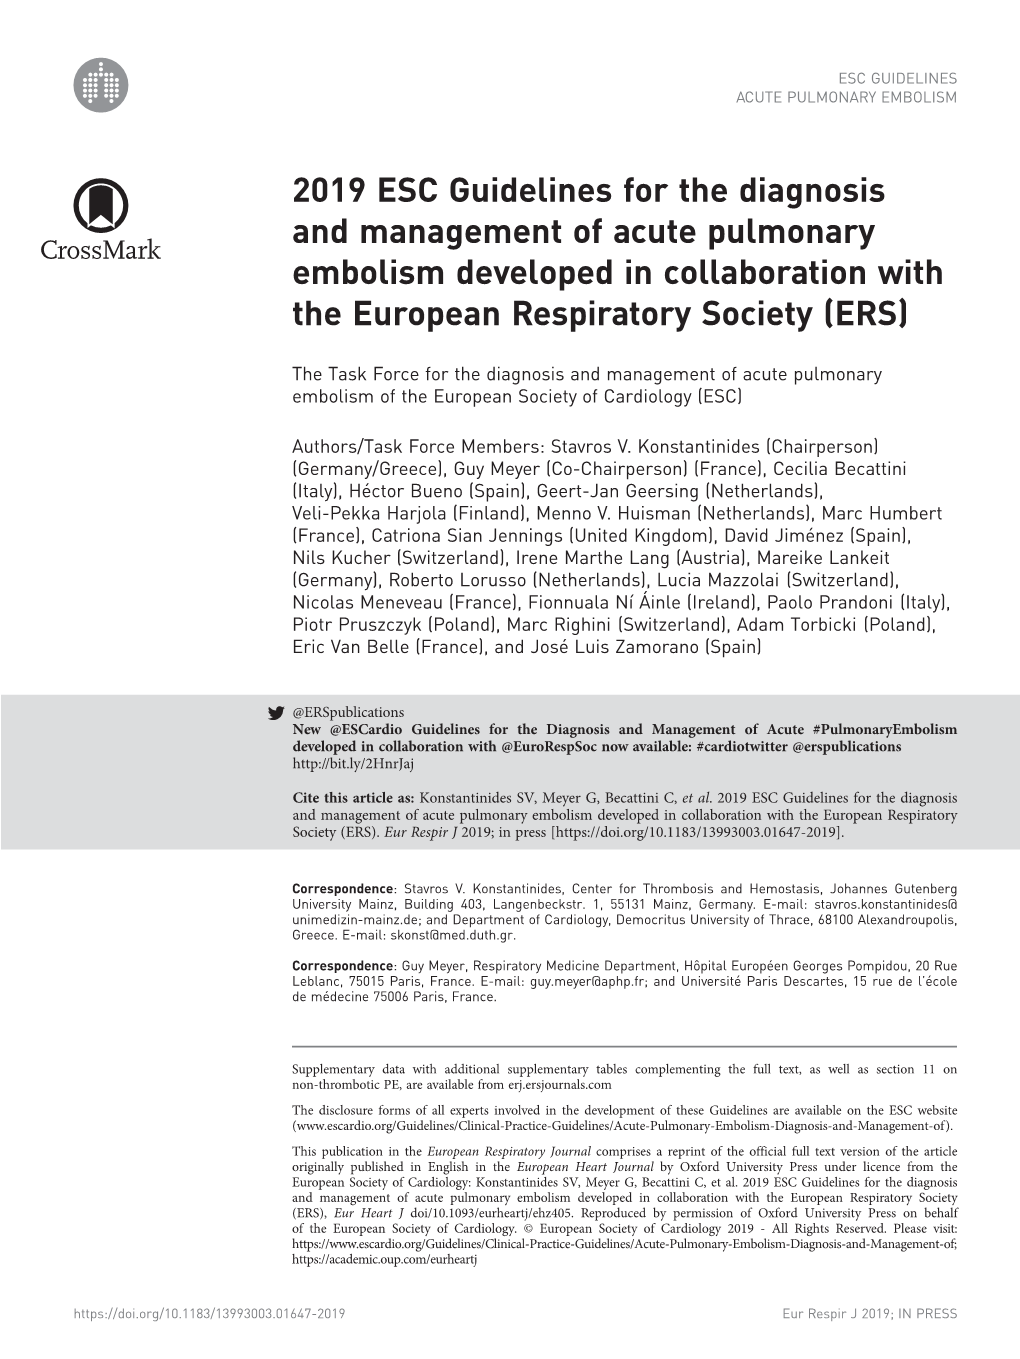 2019 ESC Guidelines for the Diagnosis and Management of Acute Pulmonary Embolism Developed in Collaboration with the European Respiratory Society (ERS)